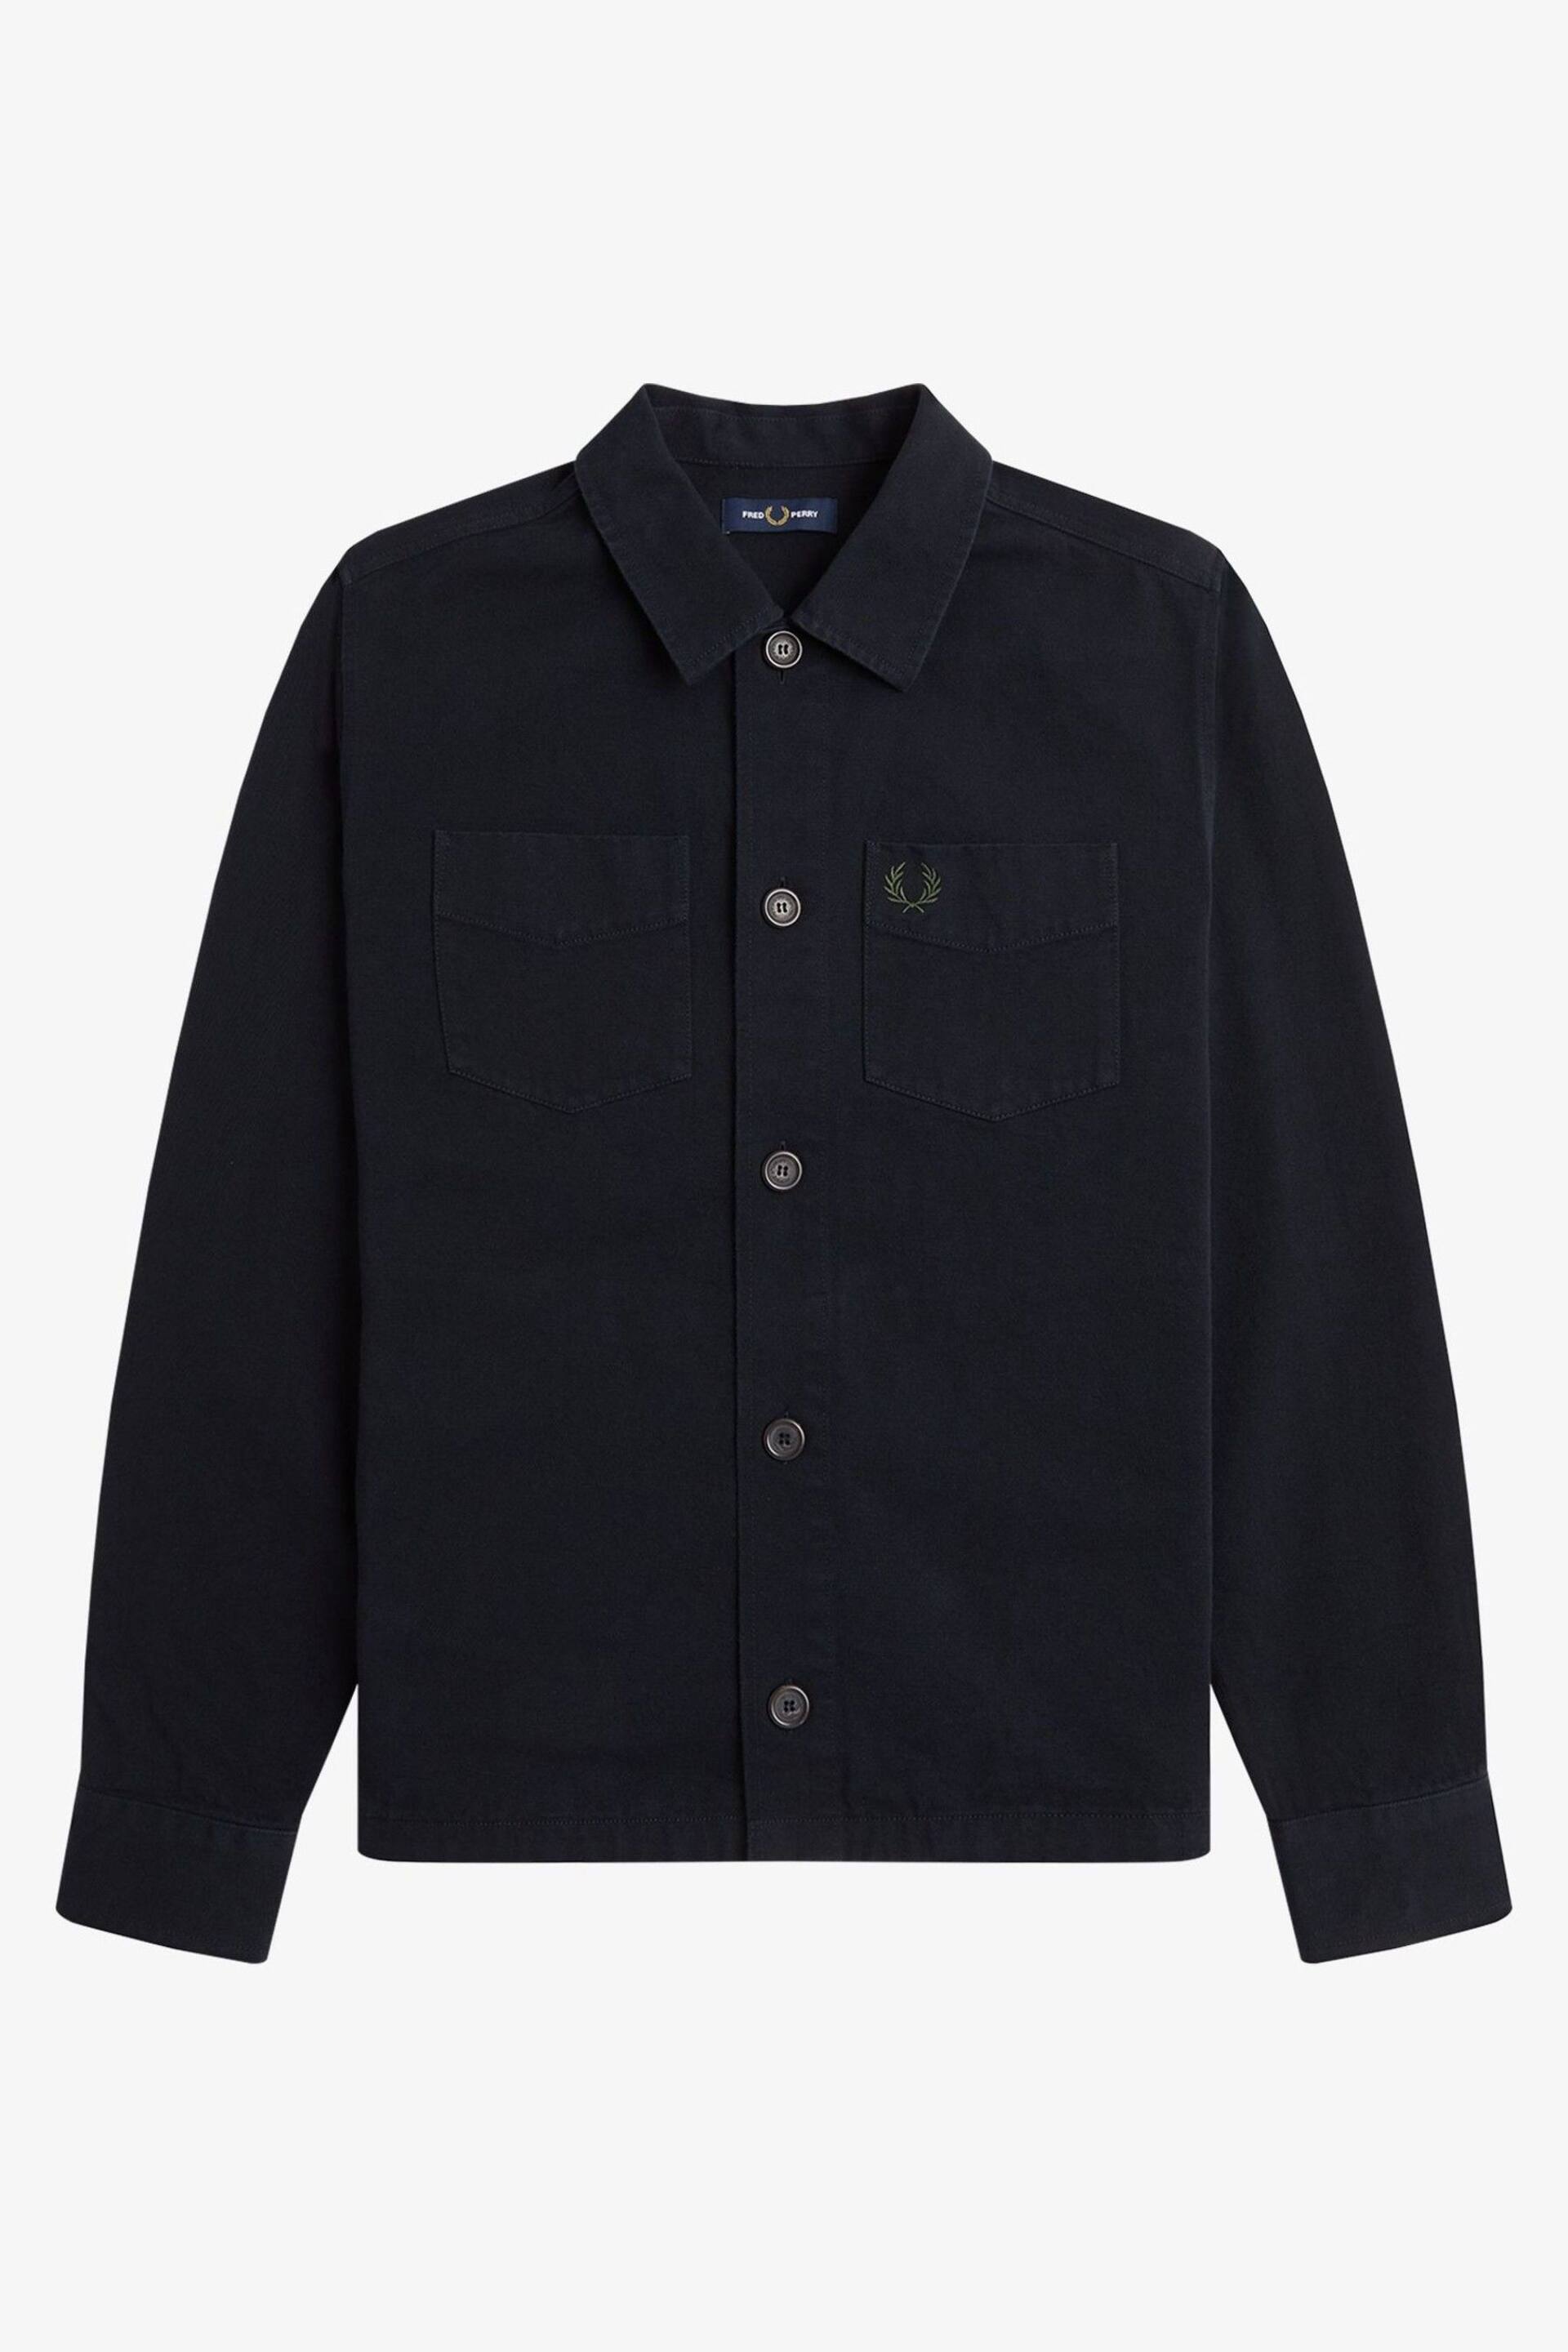 Fred Perry Black Twill Shacket Overshirt - Image 7 of 9